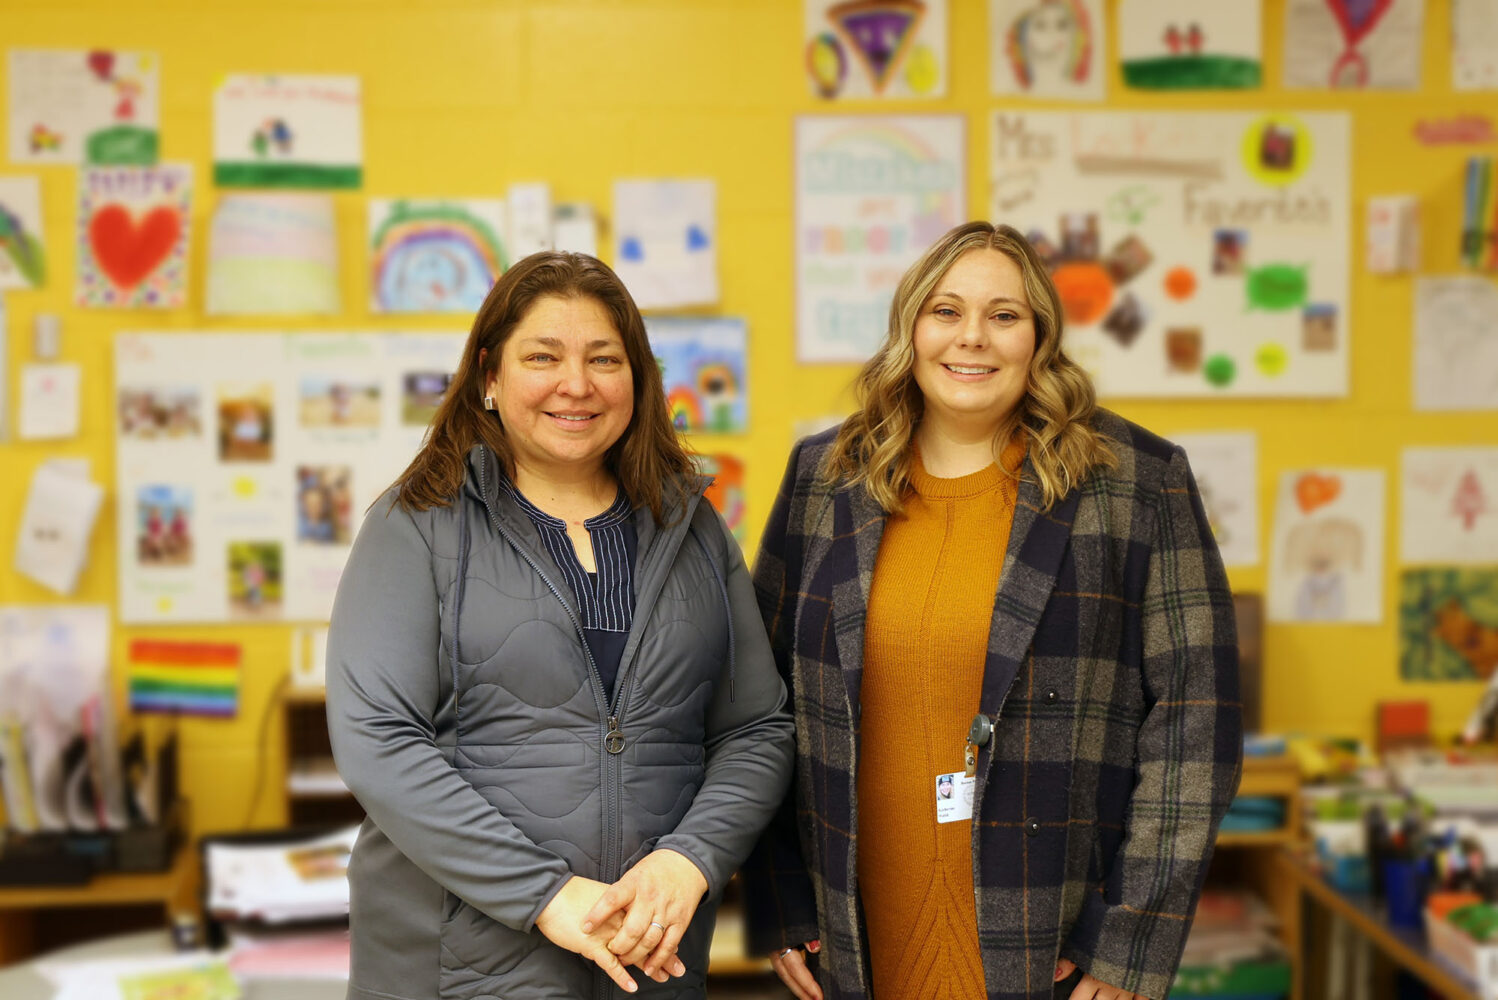 Photo: Two woman stand side by side and pose for a picture. On the left, a shorter woman with a gray cardigan and dark hair. On the right, a slightly taller woman with light hair and a plaid cardigan. They pose in a classroom setting, a yellow wall decorated with student work as the background.